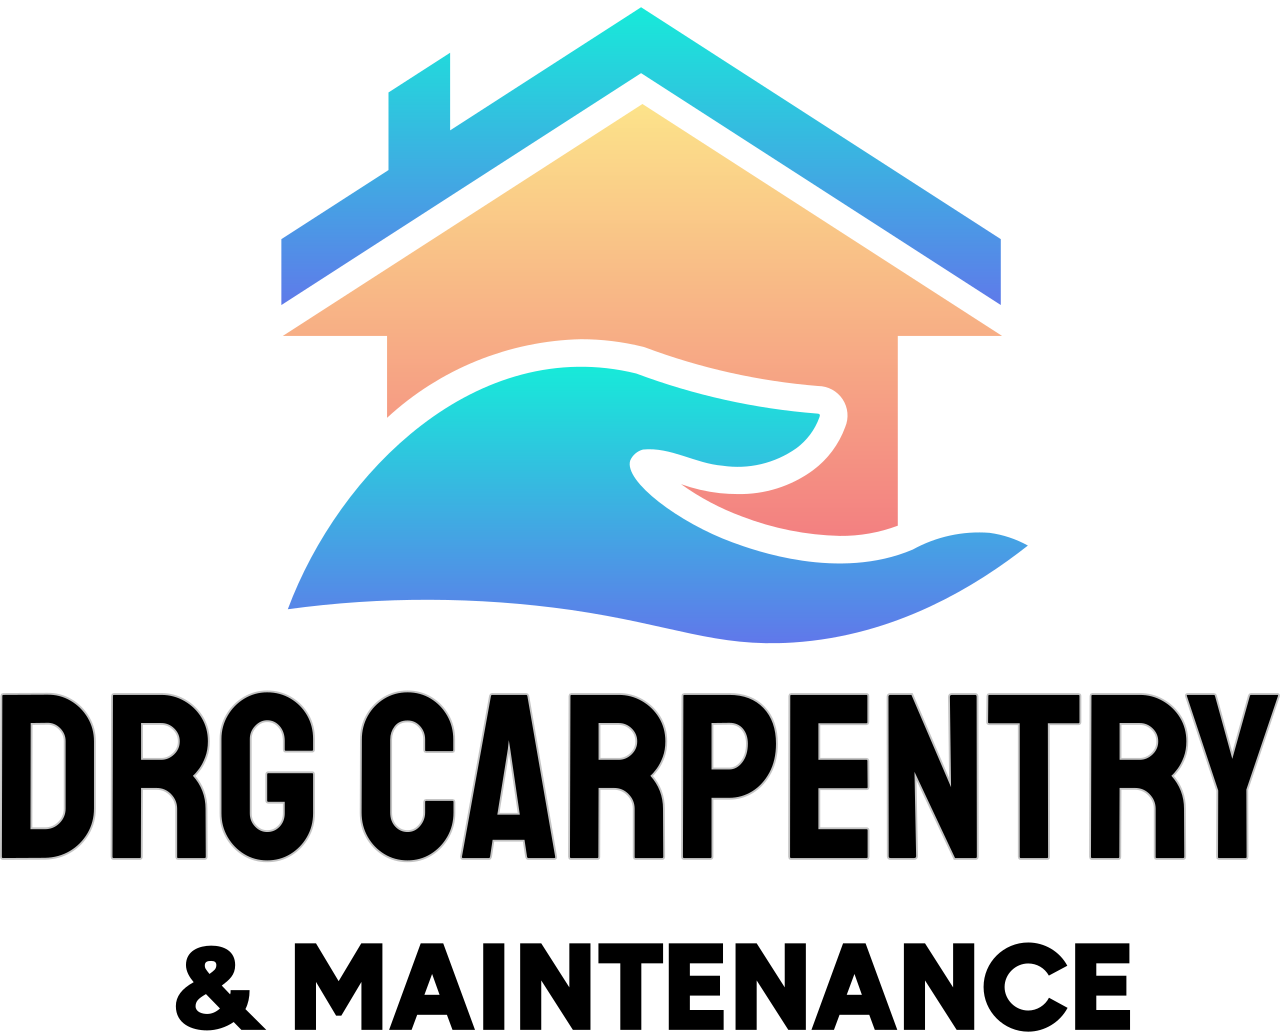 DRG CARPENTRY 's web page